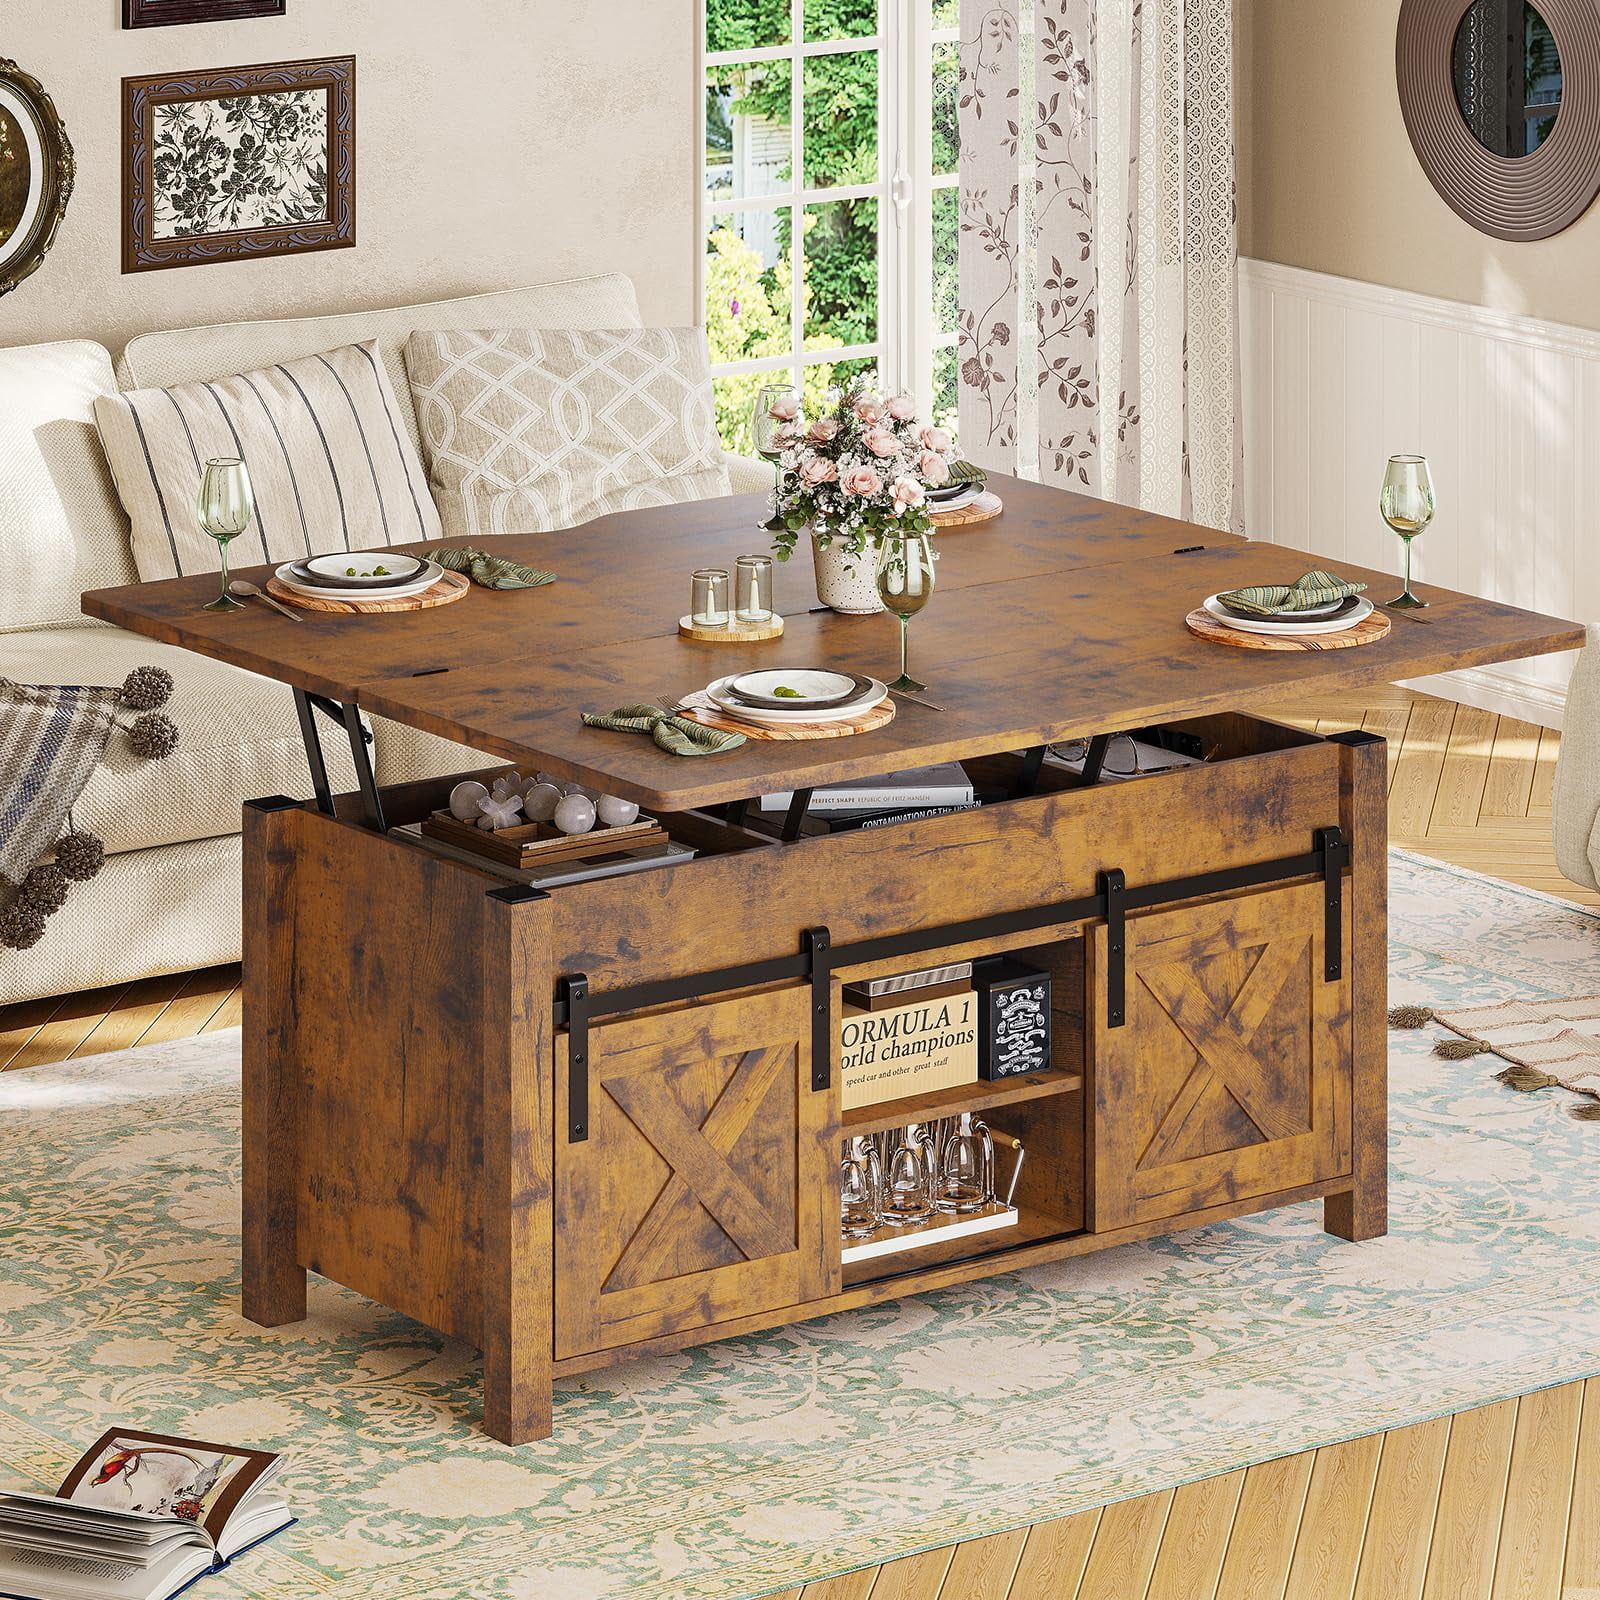 Coffee Table For Living Room, Farmhouse Lift Top Coffee Tables With Storage  And Hidden Compartment, Rising Tabletop Center Table For Living Room  Reception Room, Rustic Brown – Walmart With Regard To Farmhouse Lift Top Tables (View 4 of 15)